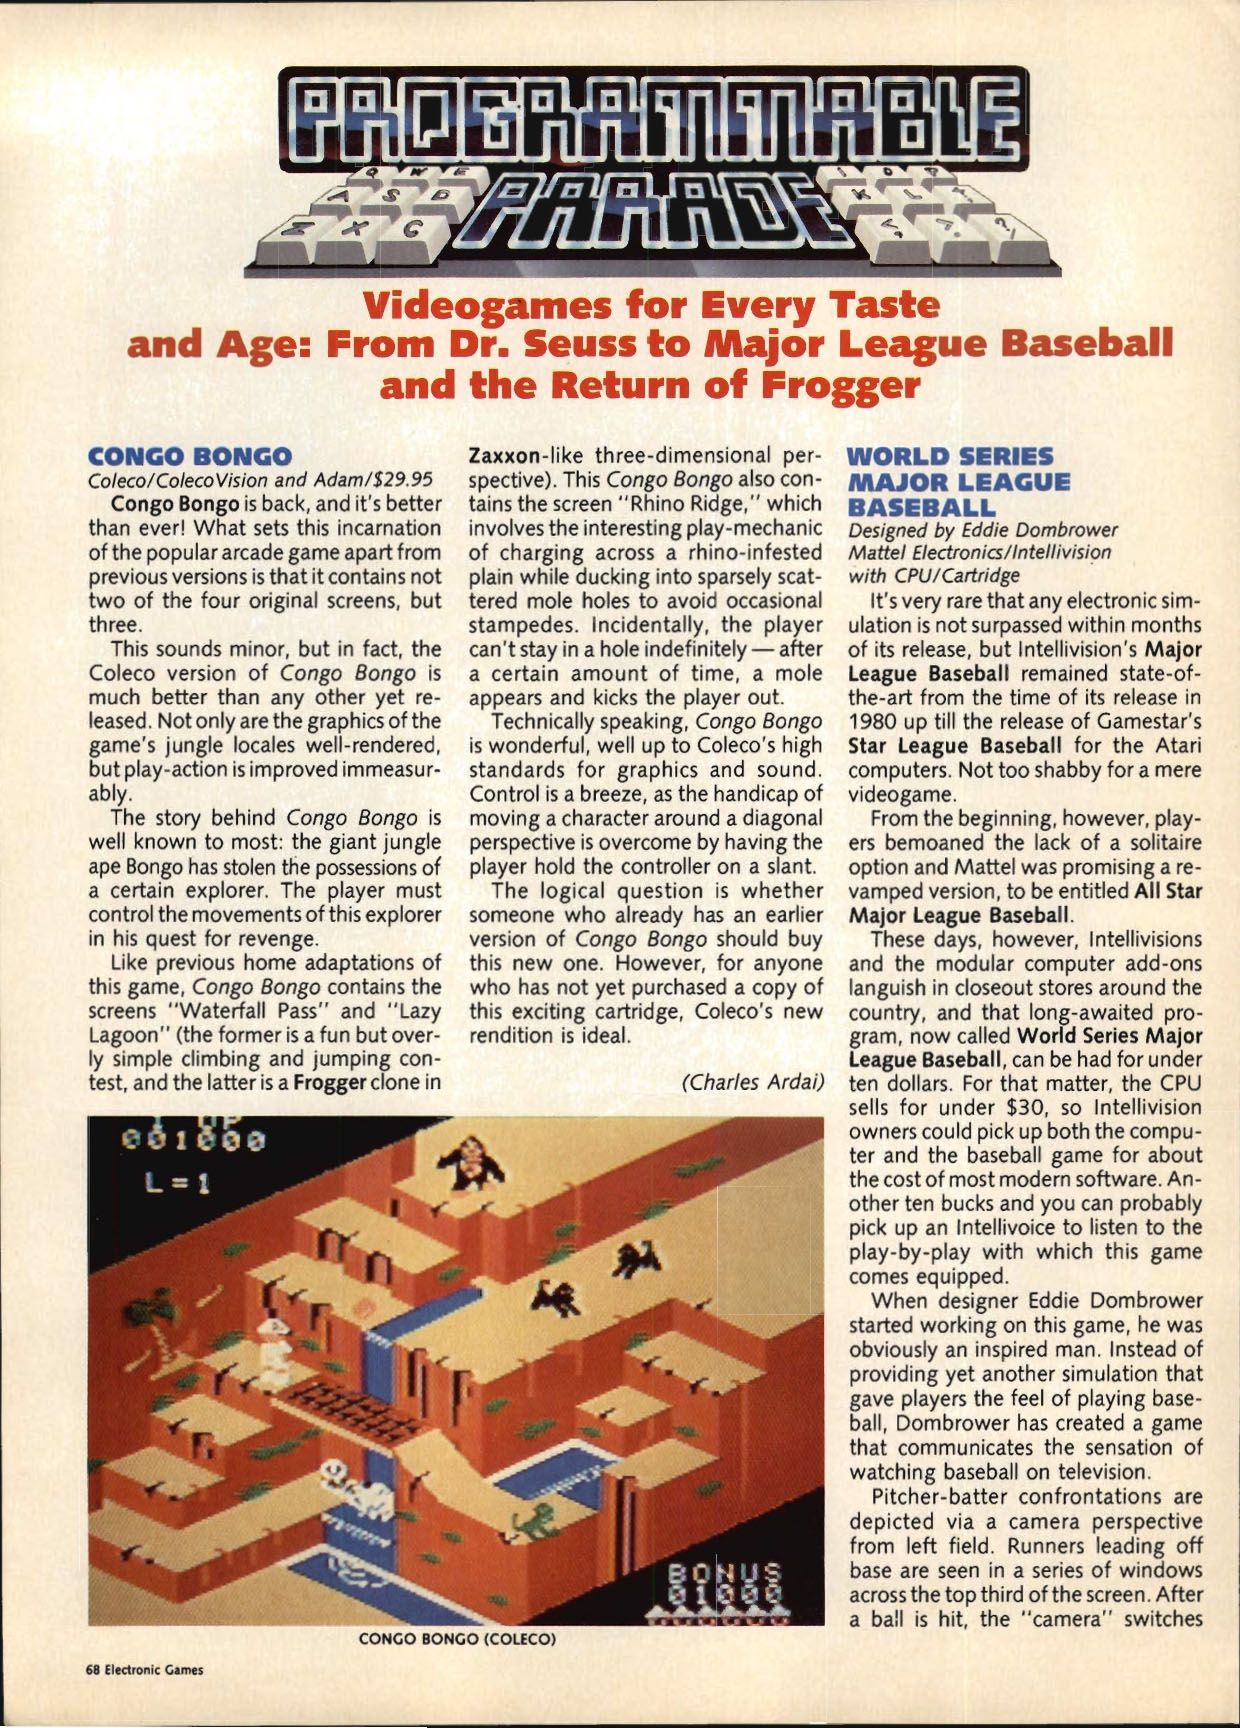 World Series Major League Baseball Review, Electronic Games March 1985 page 68